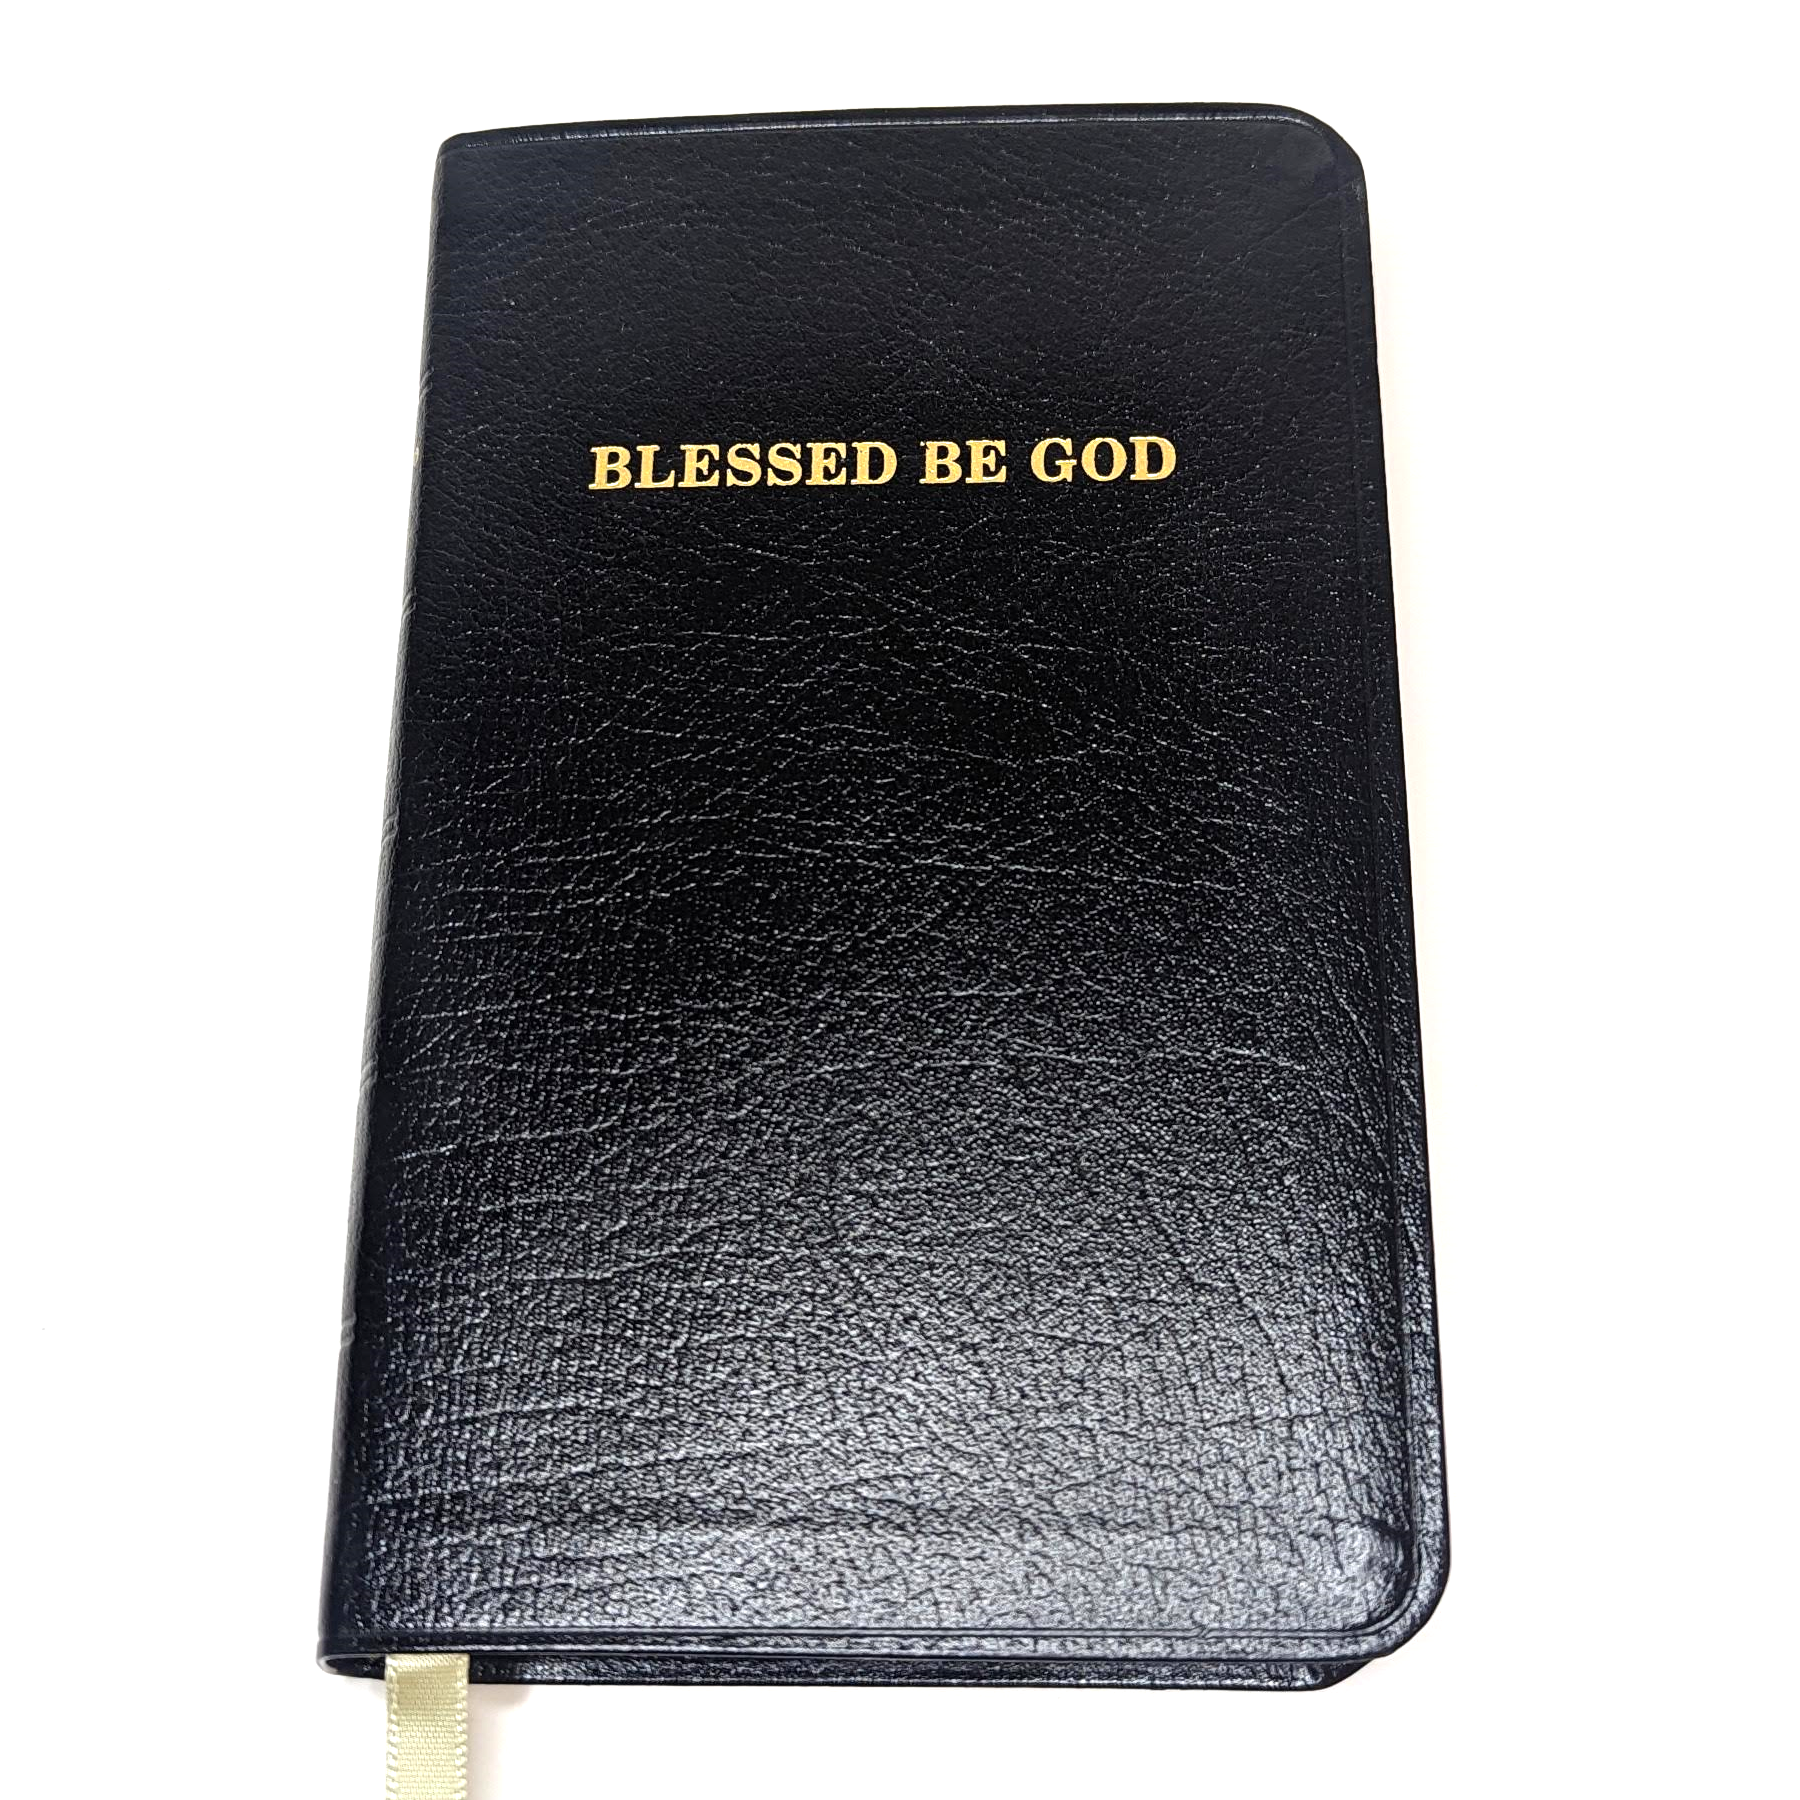 Blessed be God: The Complete Traditional Catholic Prayer Book